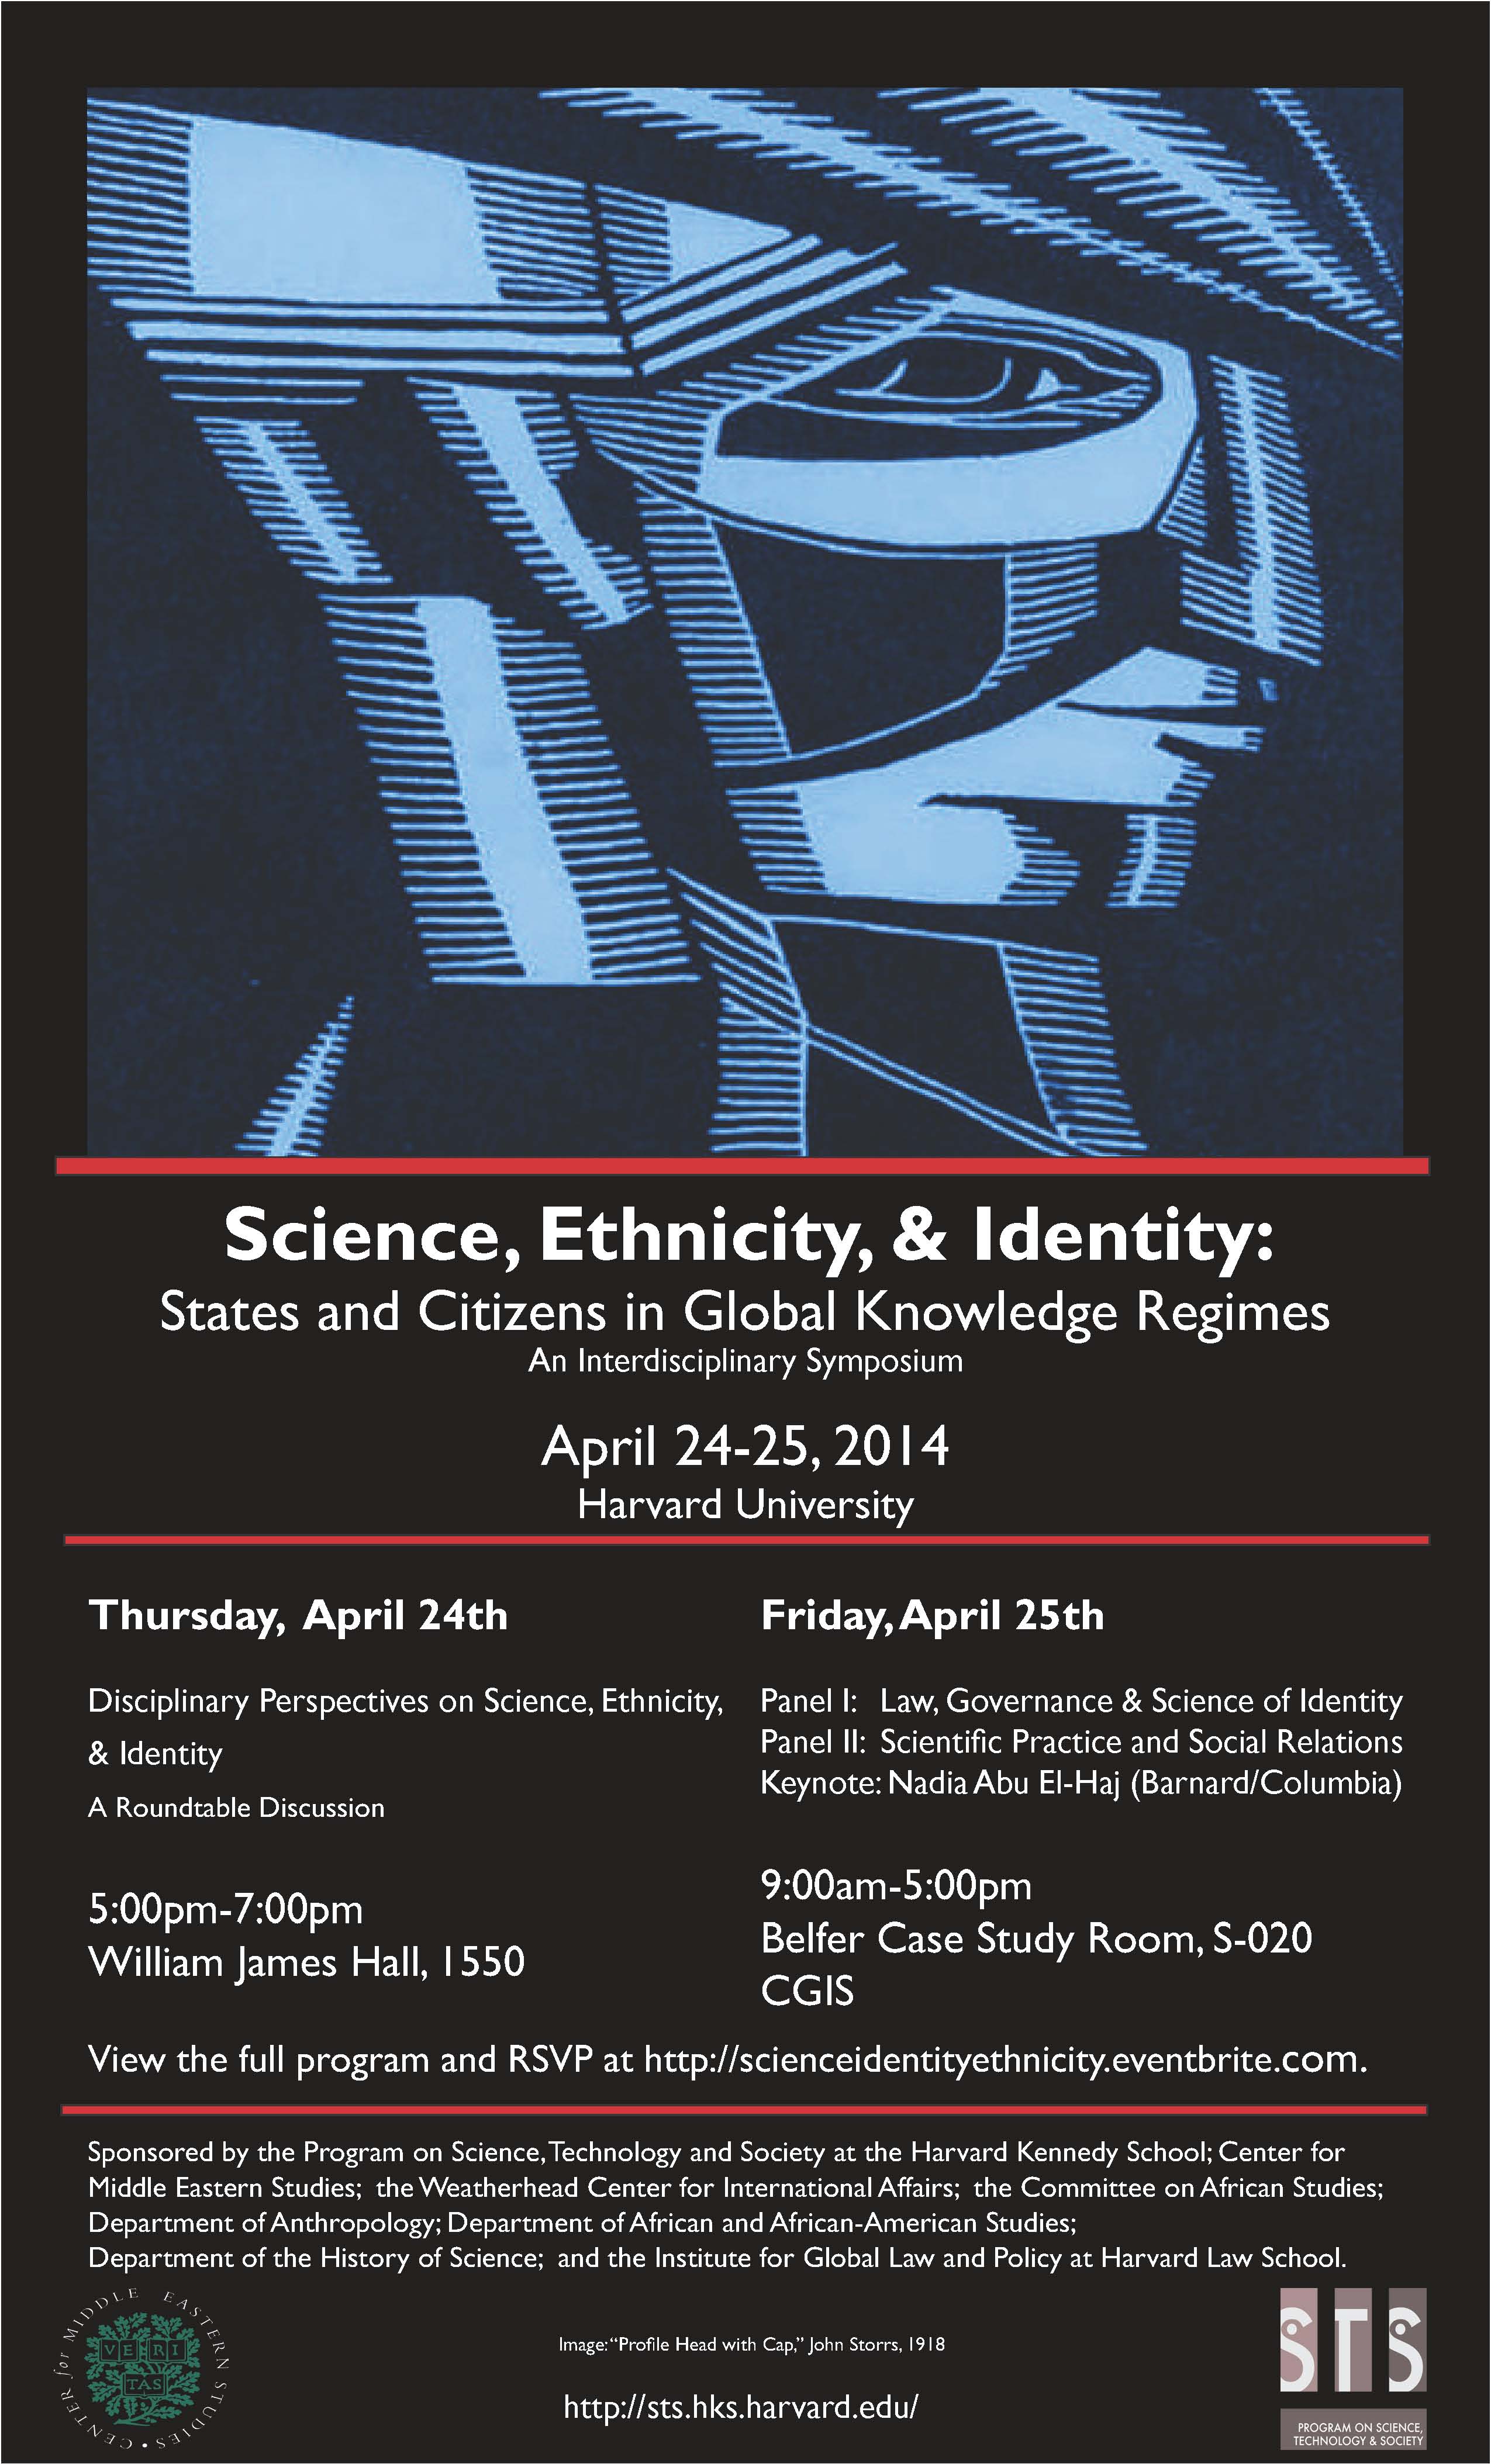 Science, Ethnicity, and Identity event poster